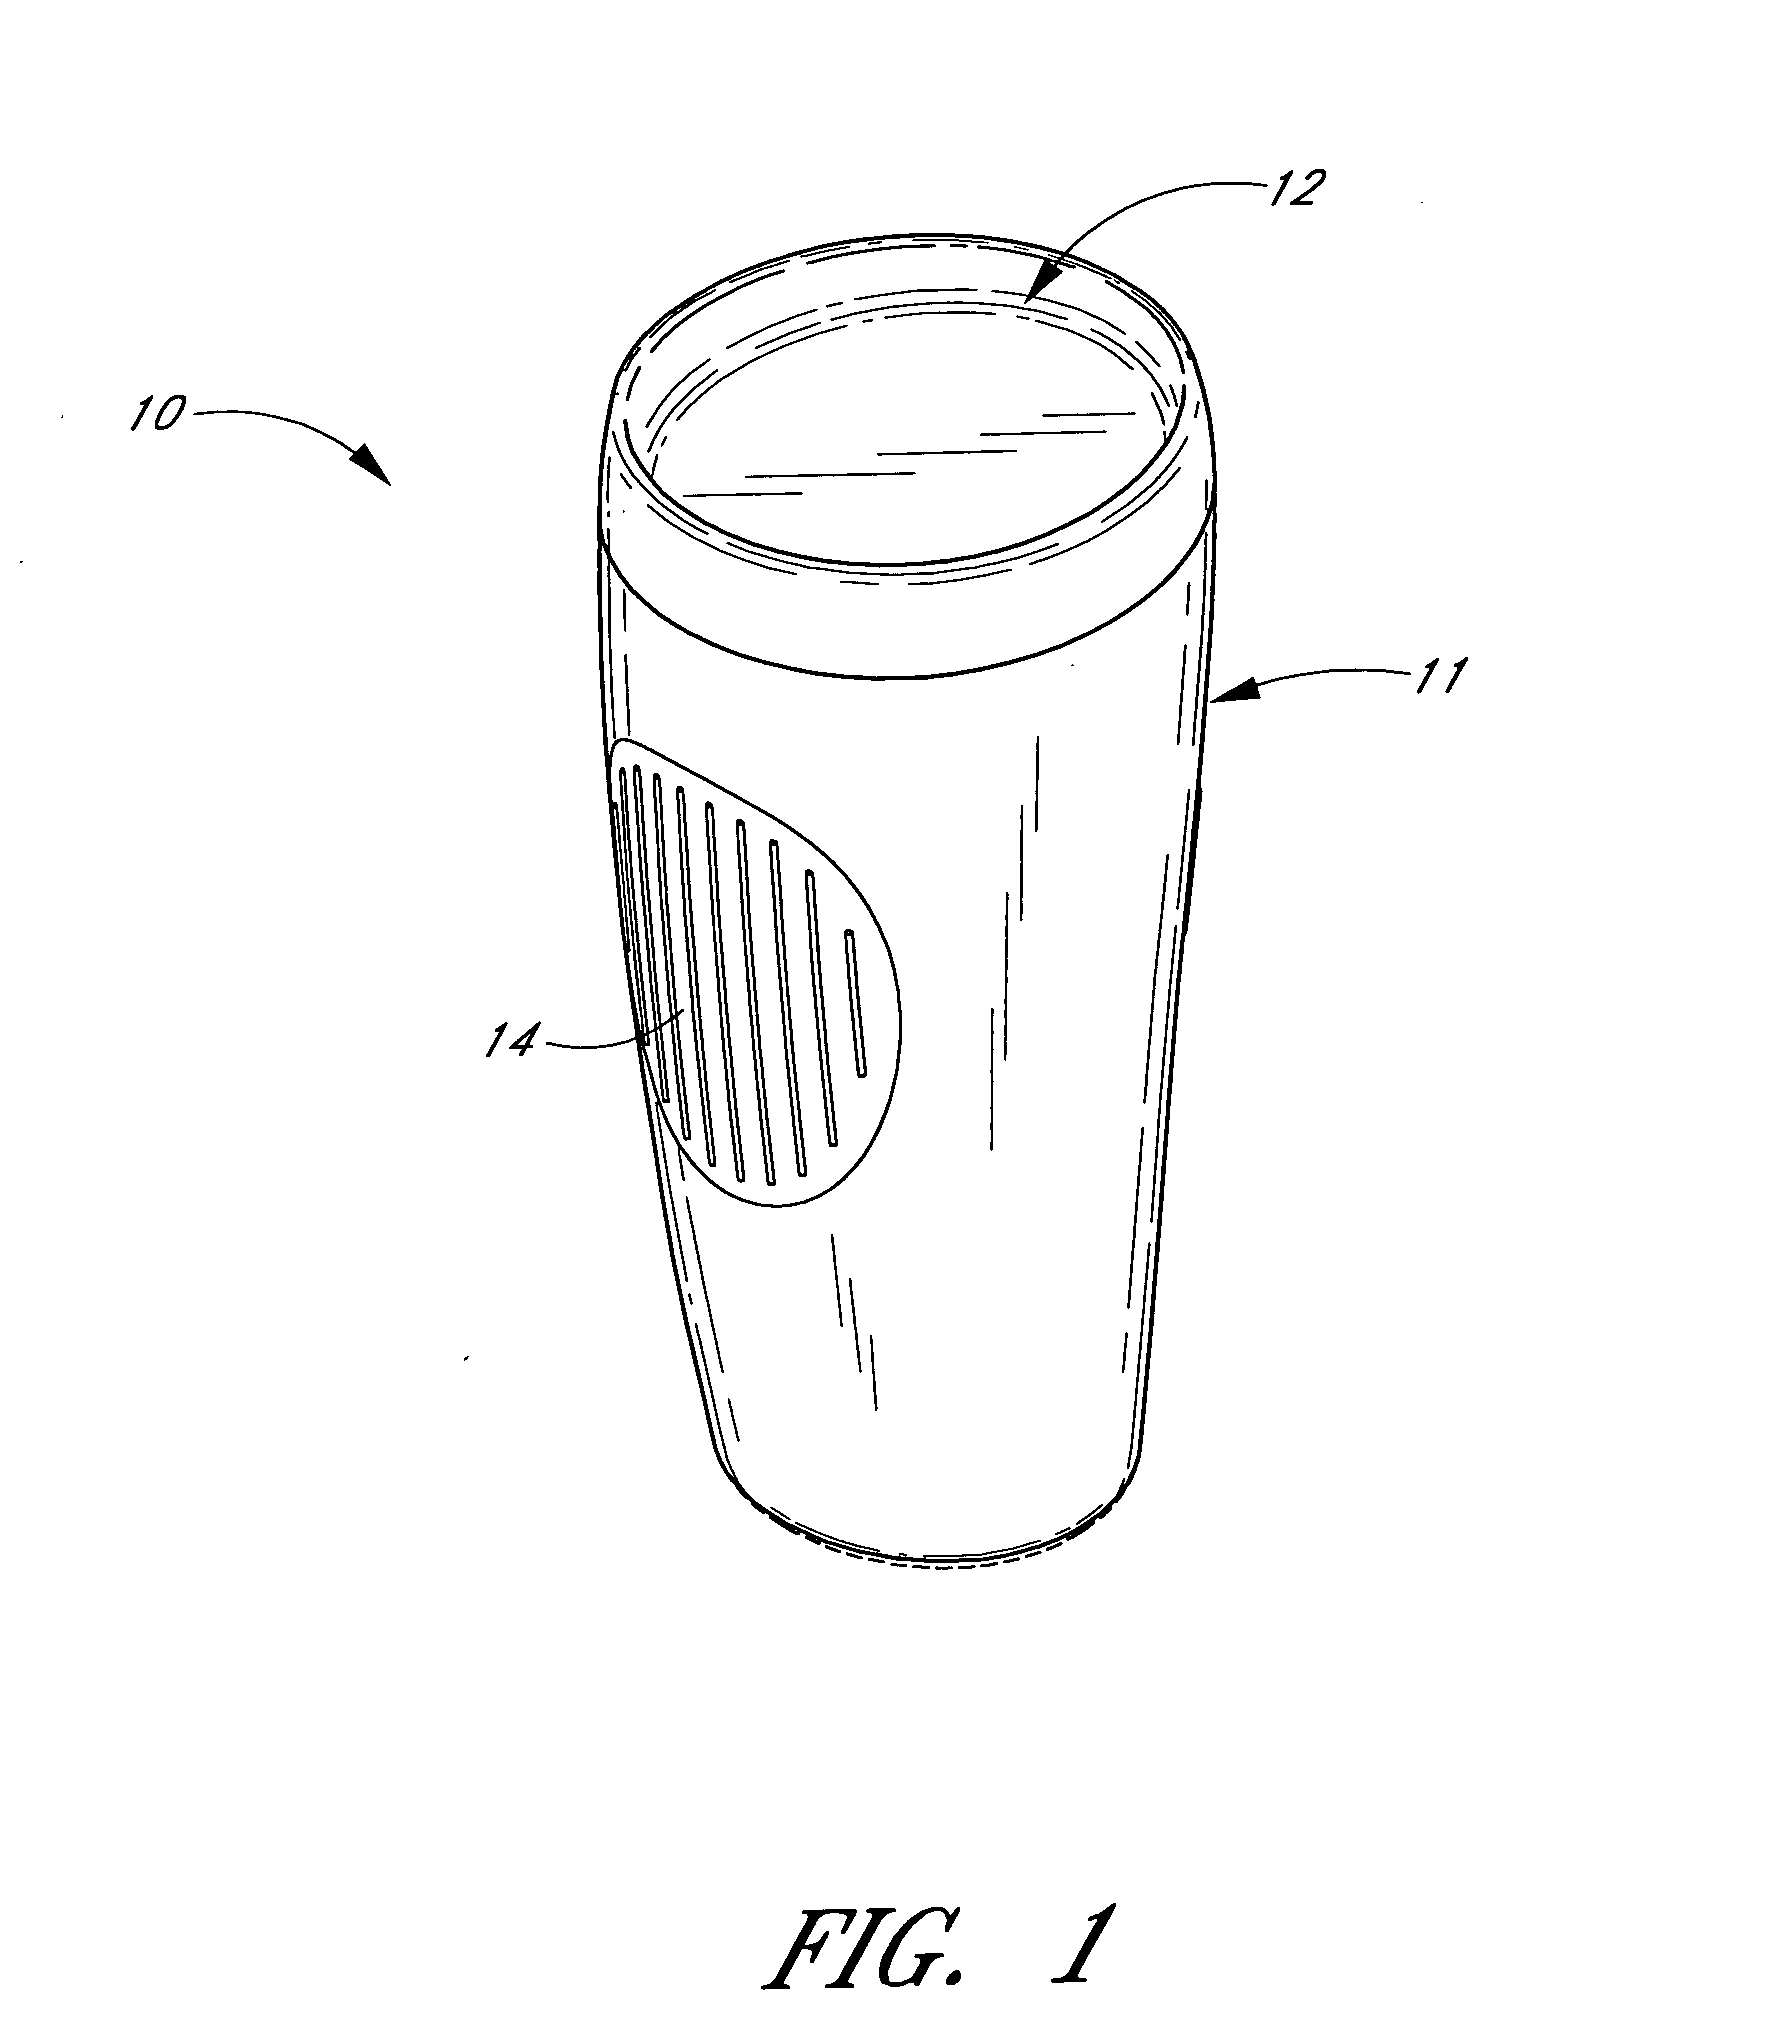 Beverage container having a squeeze-actuated self-sealing valve